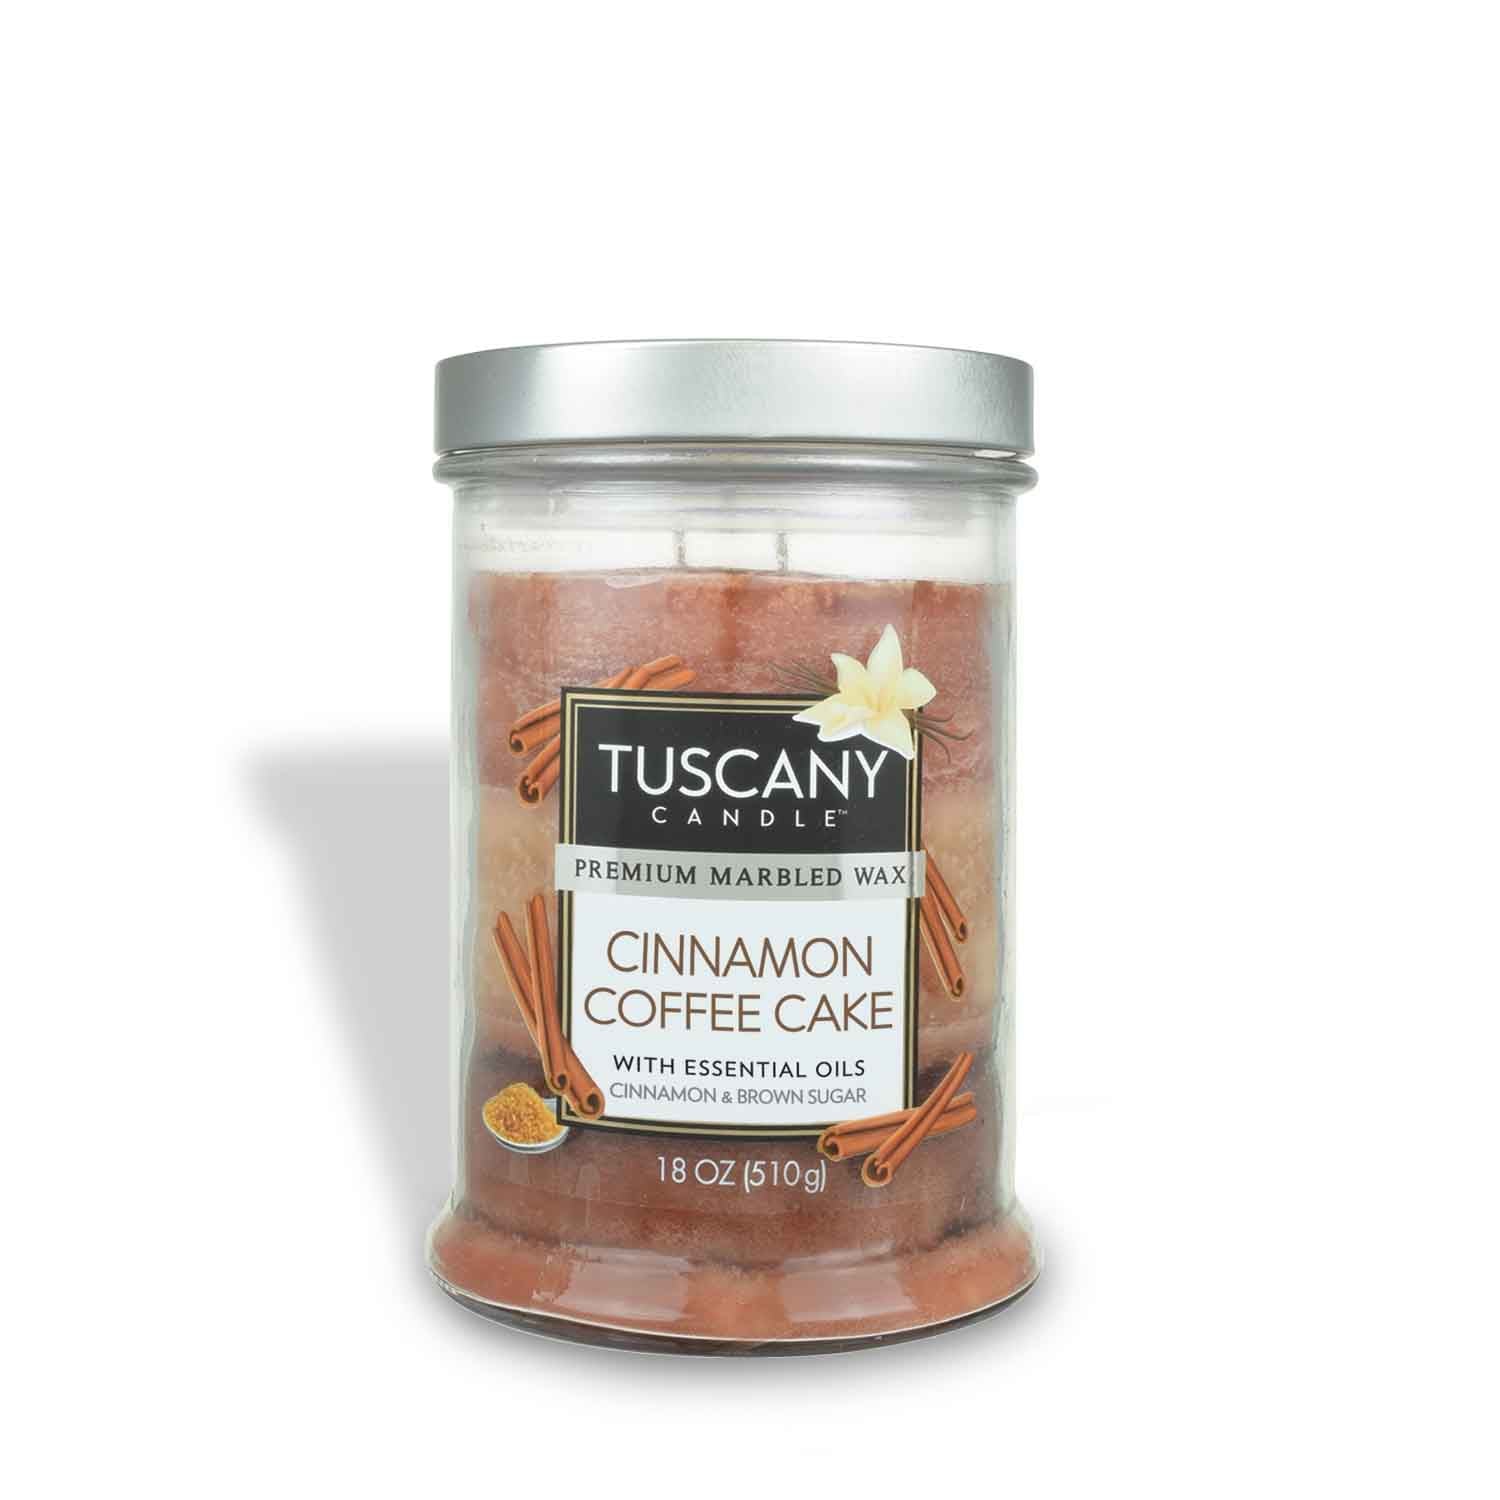 A Cinnamon Coffee Cake Long-Lasting Scented Jar Candle (18 oz) by Tuscany Candle.